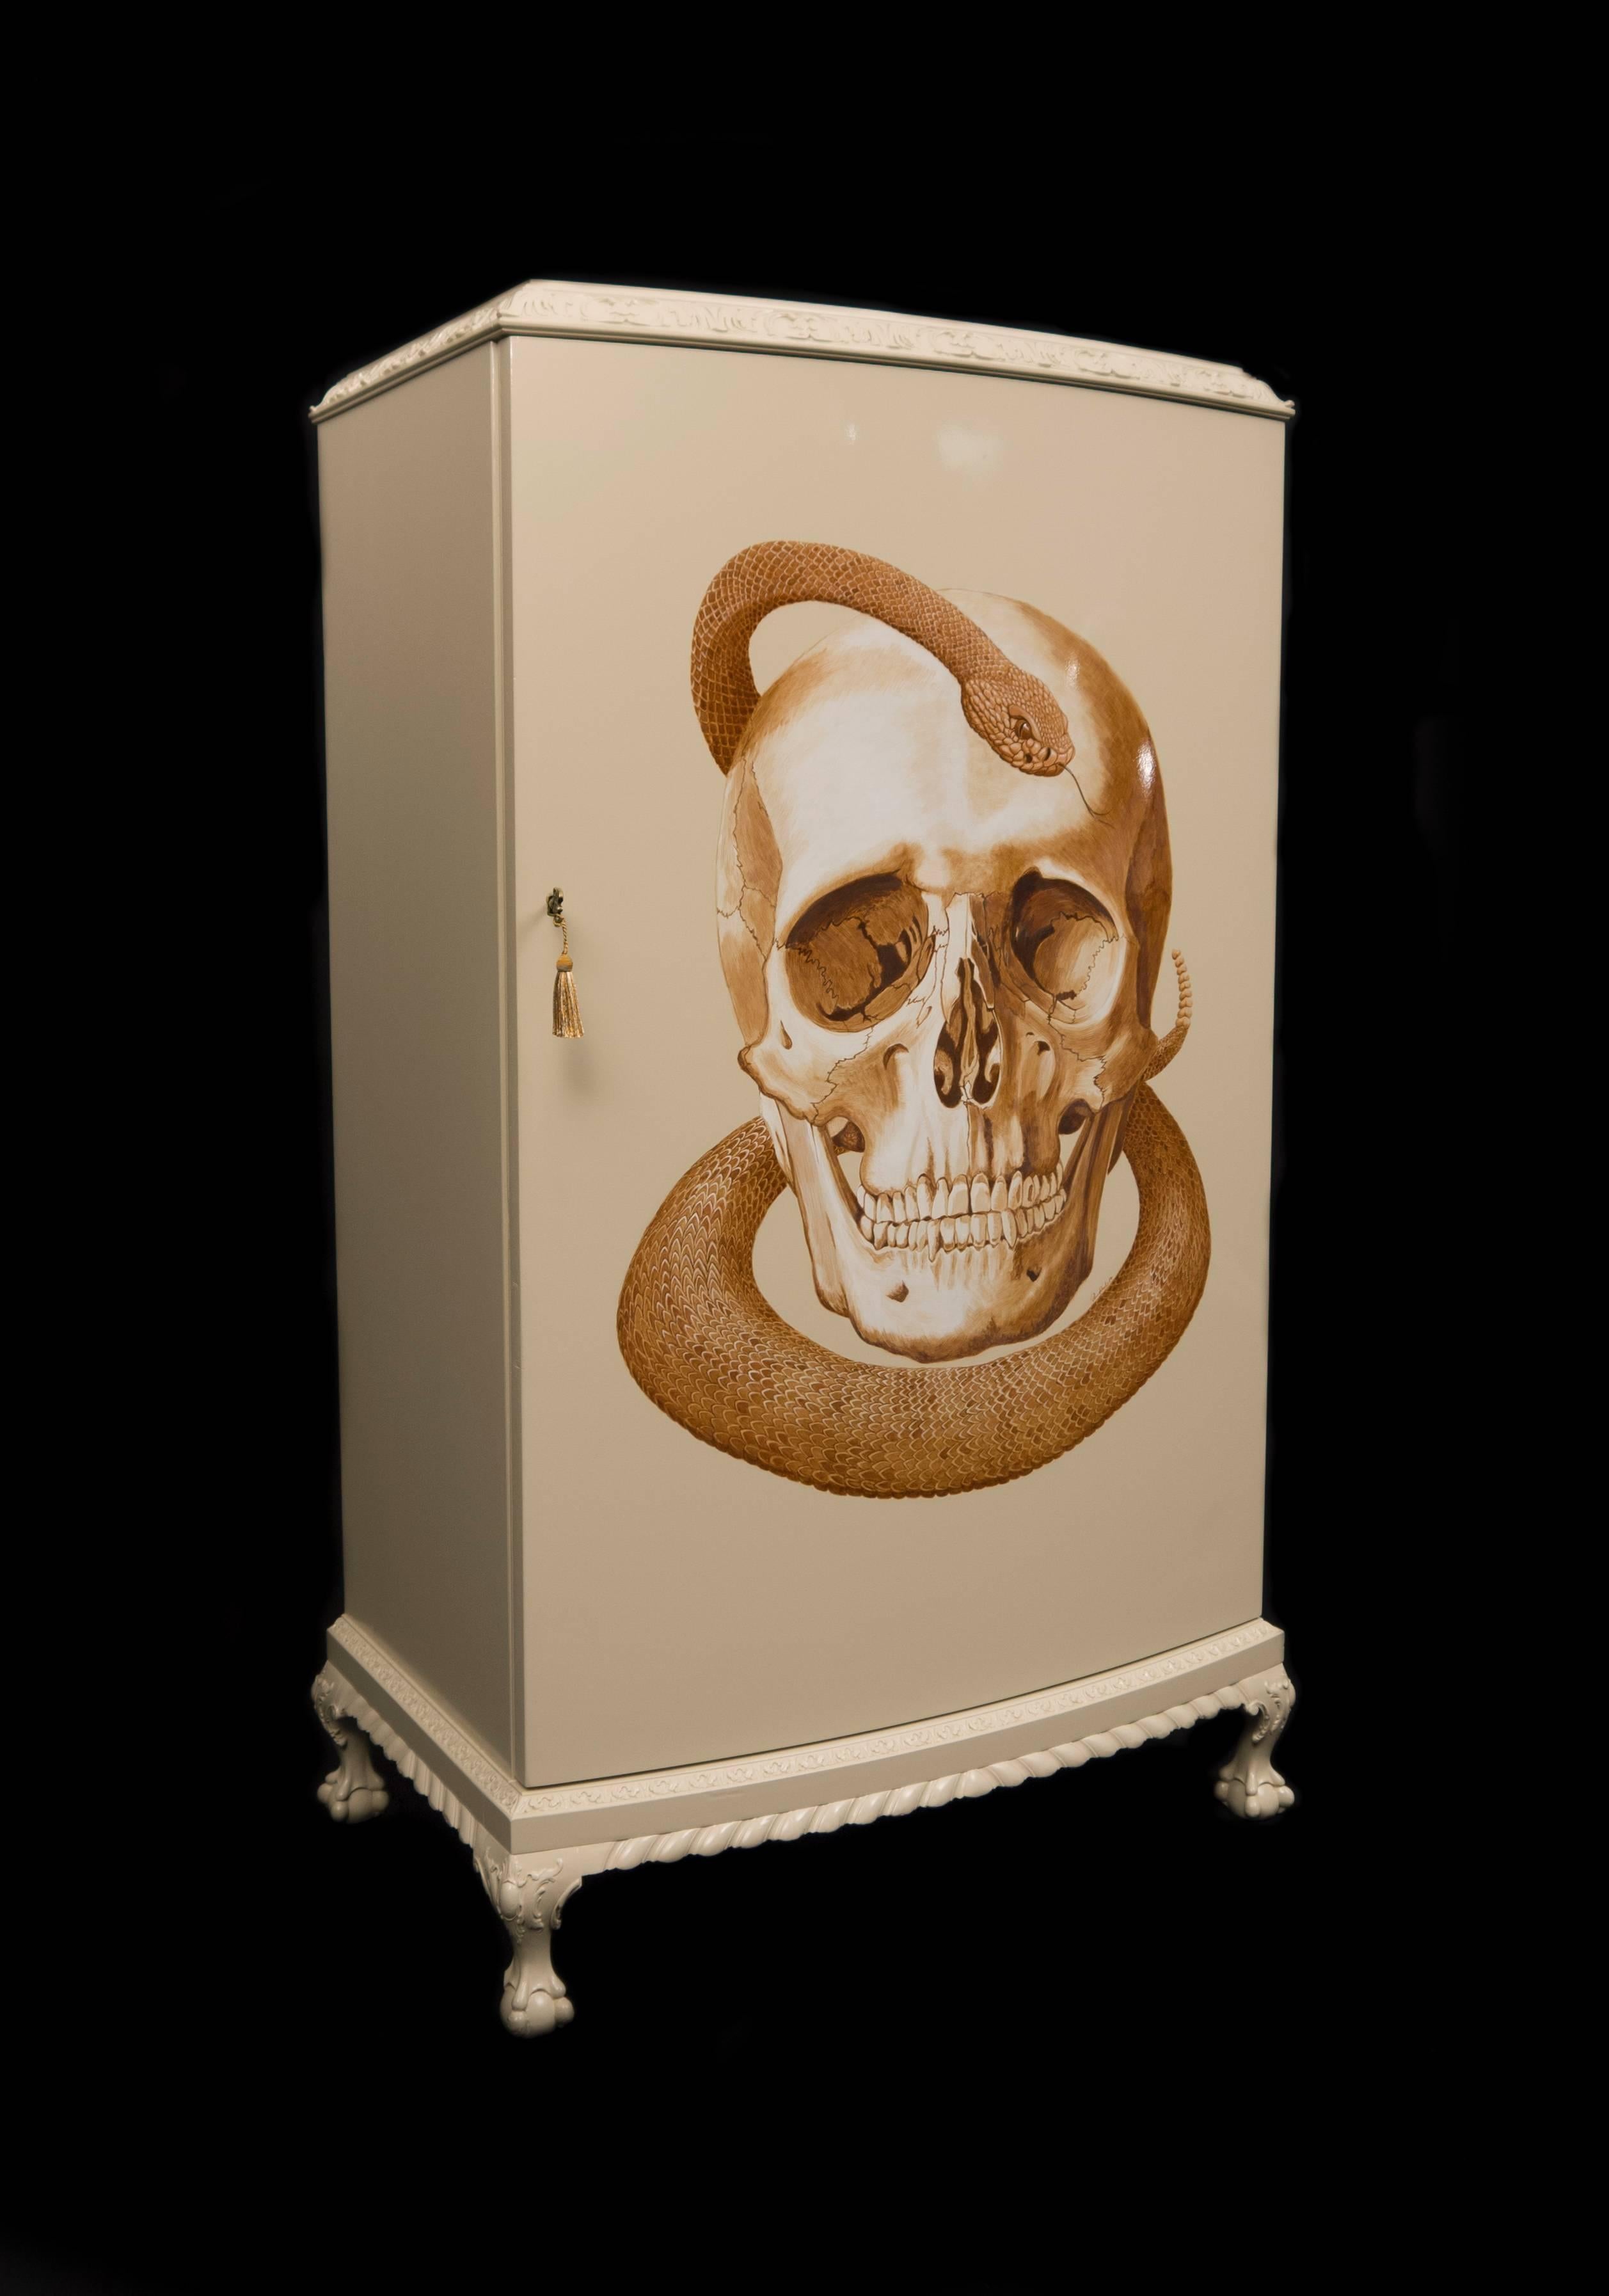 This early 20th century cabinet has been refurbished to a high standard and hand-painted as a celebration of symbolism in art. A unique blend of modern and Classic, the skull and snake symbolize the duality of life in death and rebirth down the ages